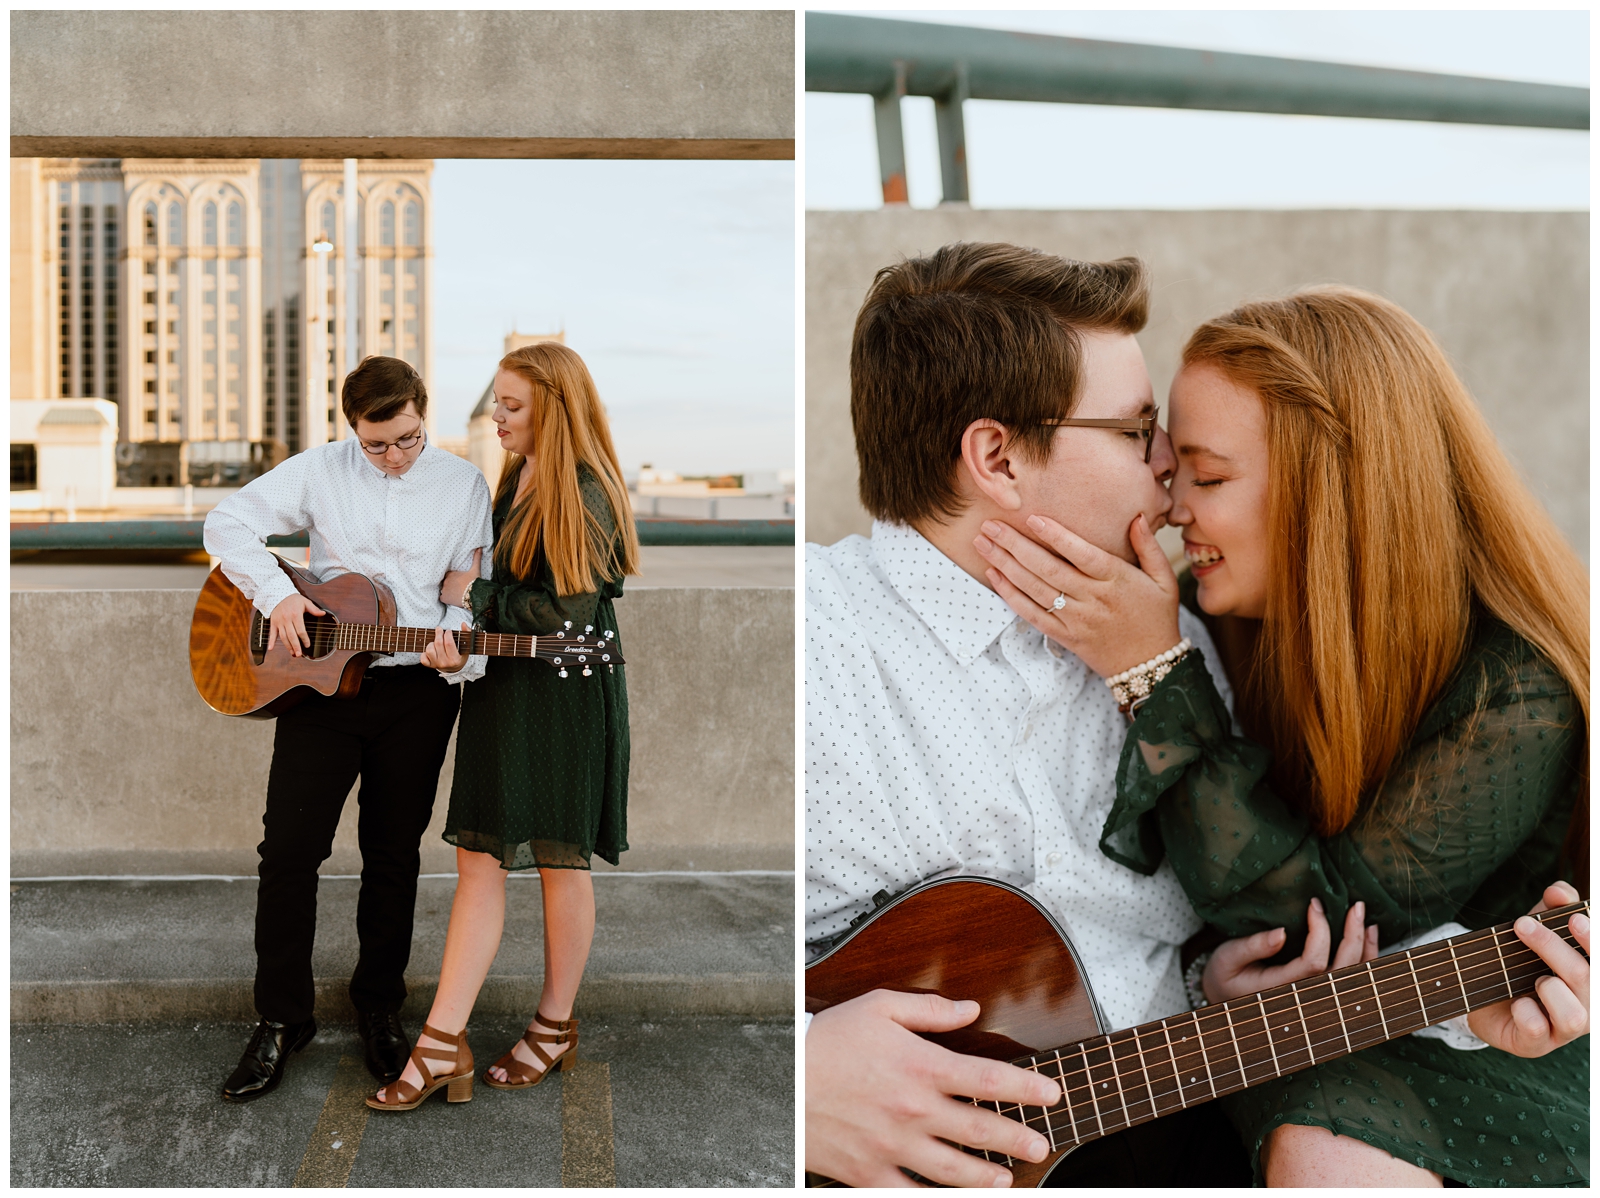 Parking deck Greensboro engagement session with guitar by NC wedding and elopement photographer